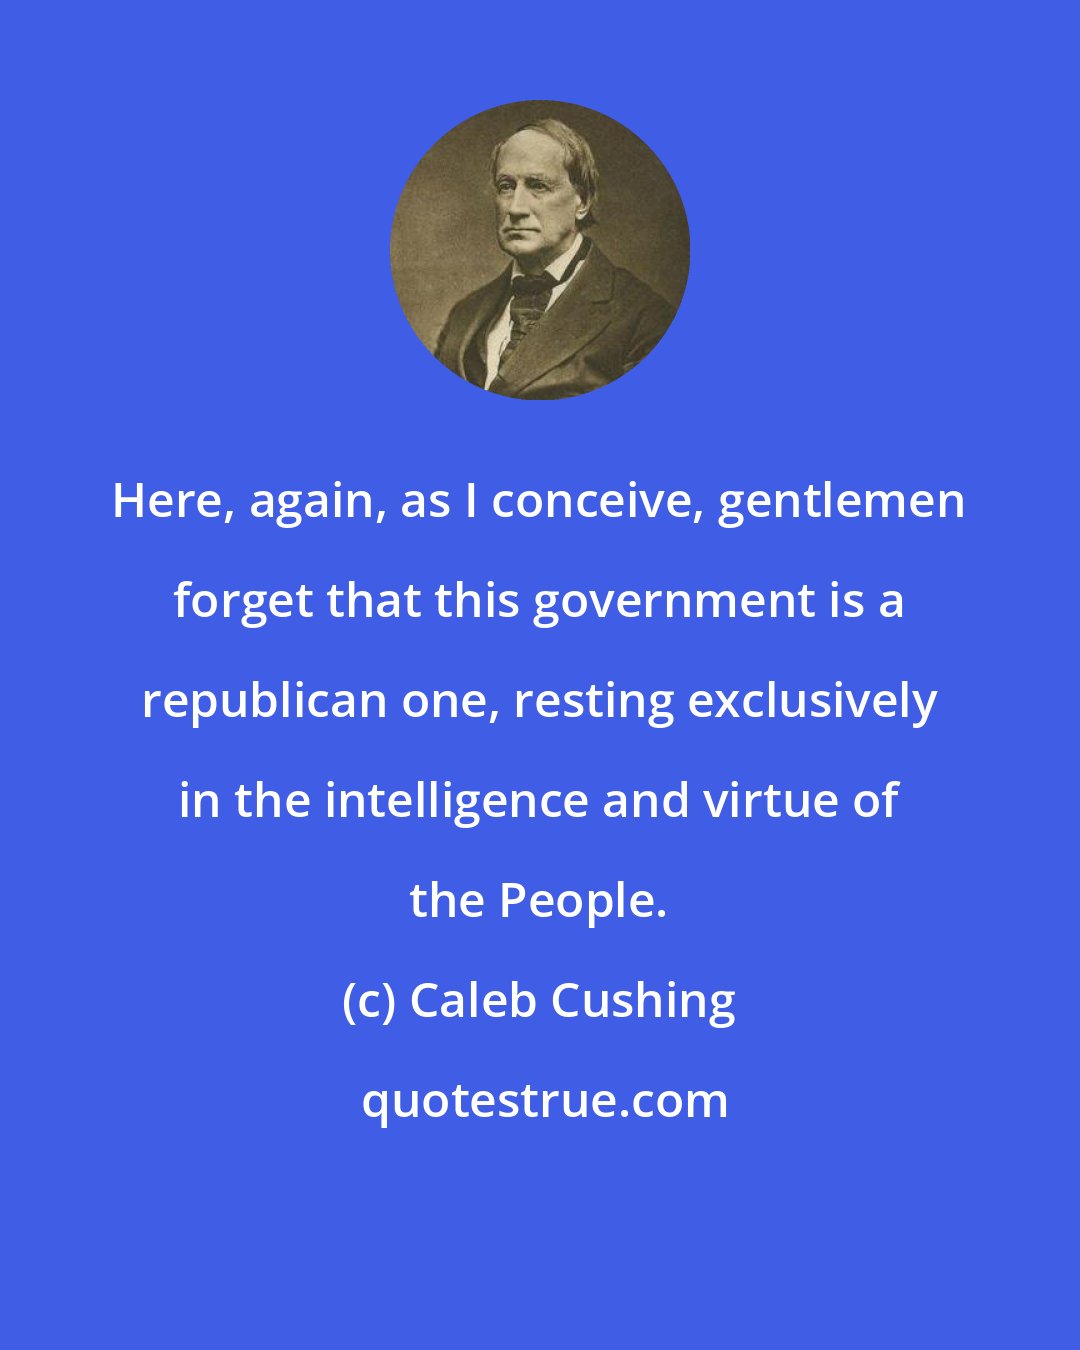 Caleb Cushing: Here, again, as I conceive, gentlemen forget that this government is a republican one, resting exclusively in the intelligence and virtue of the People.